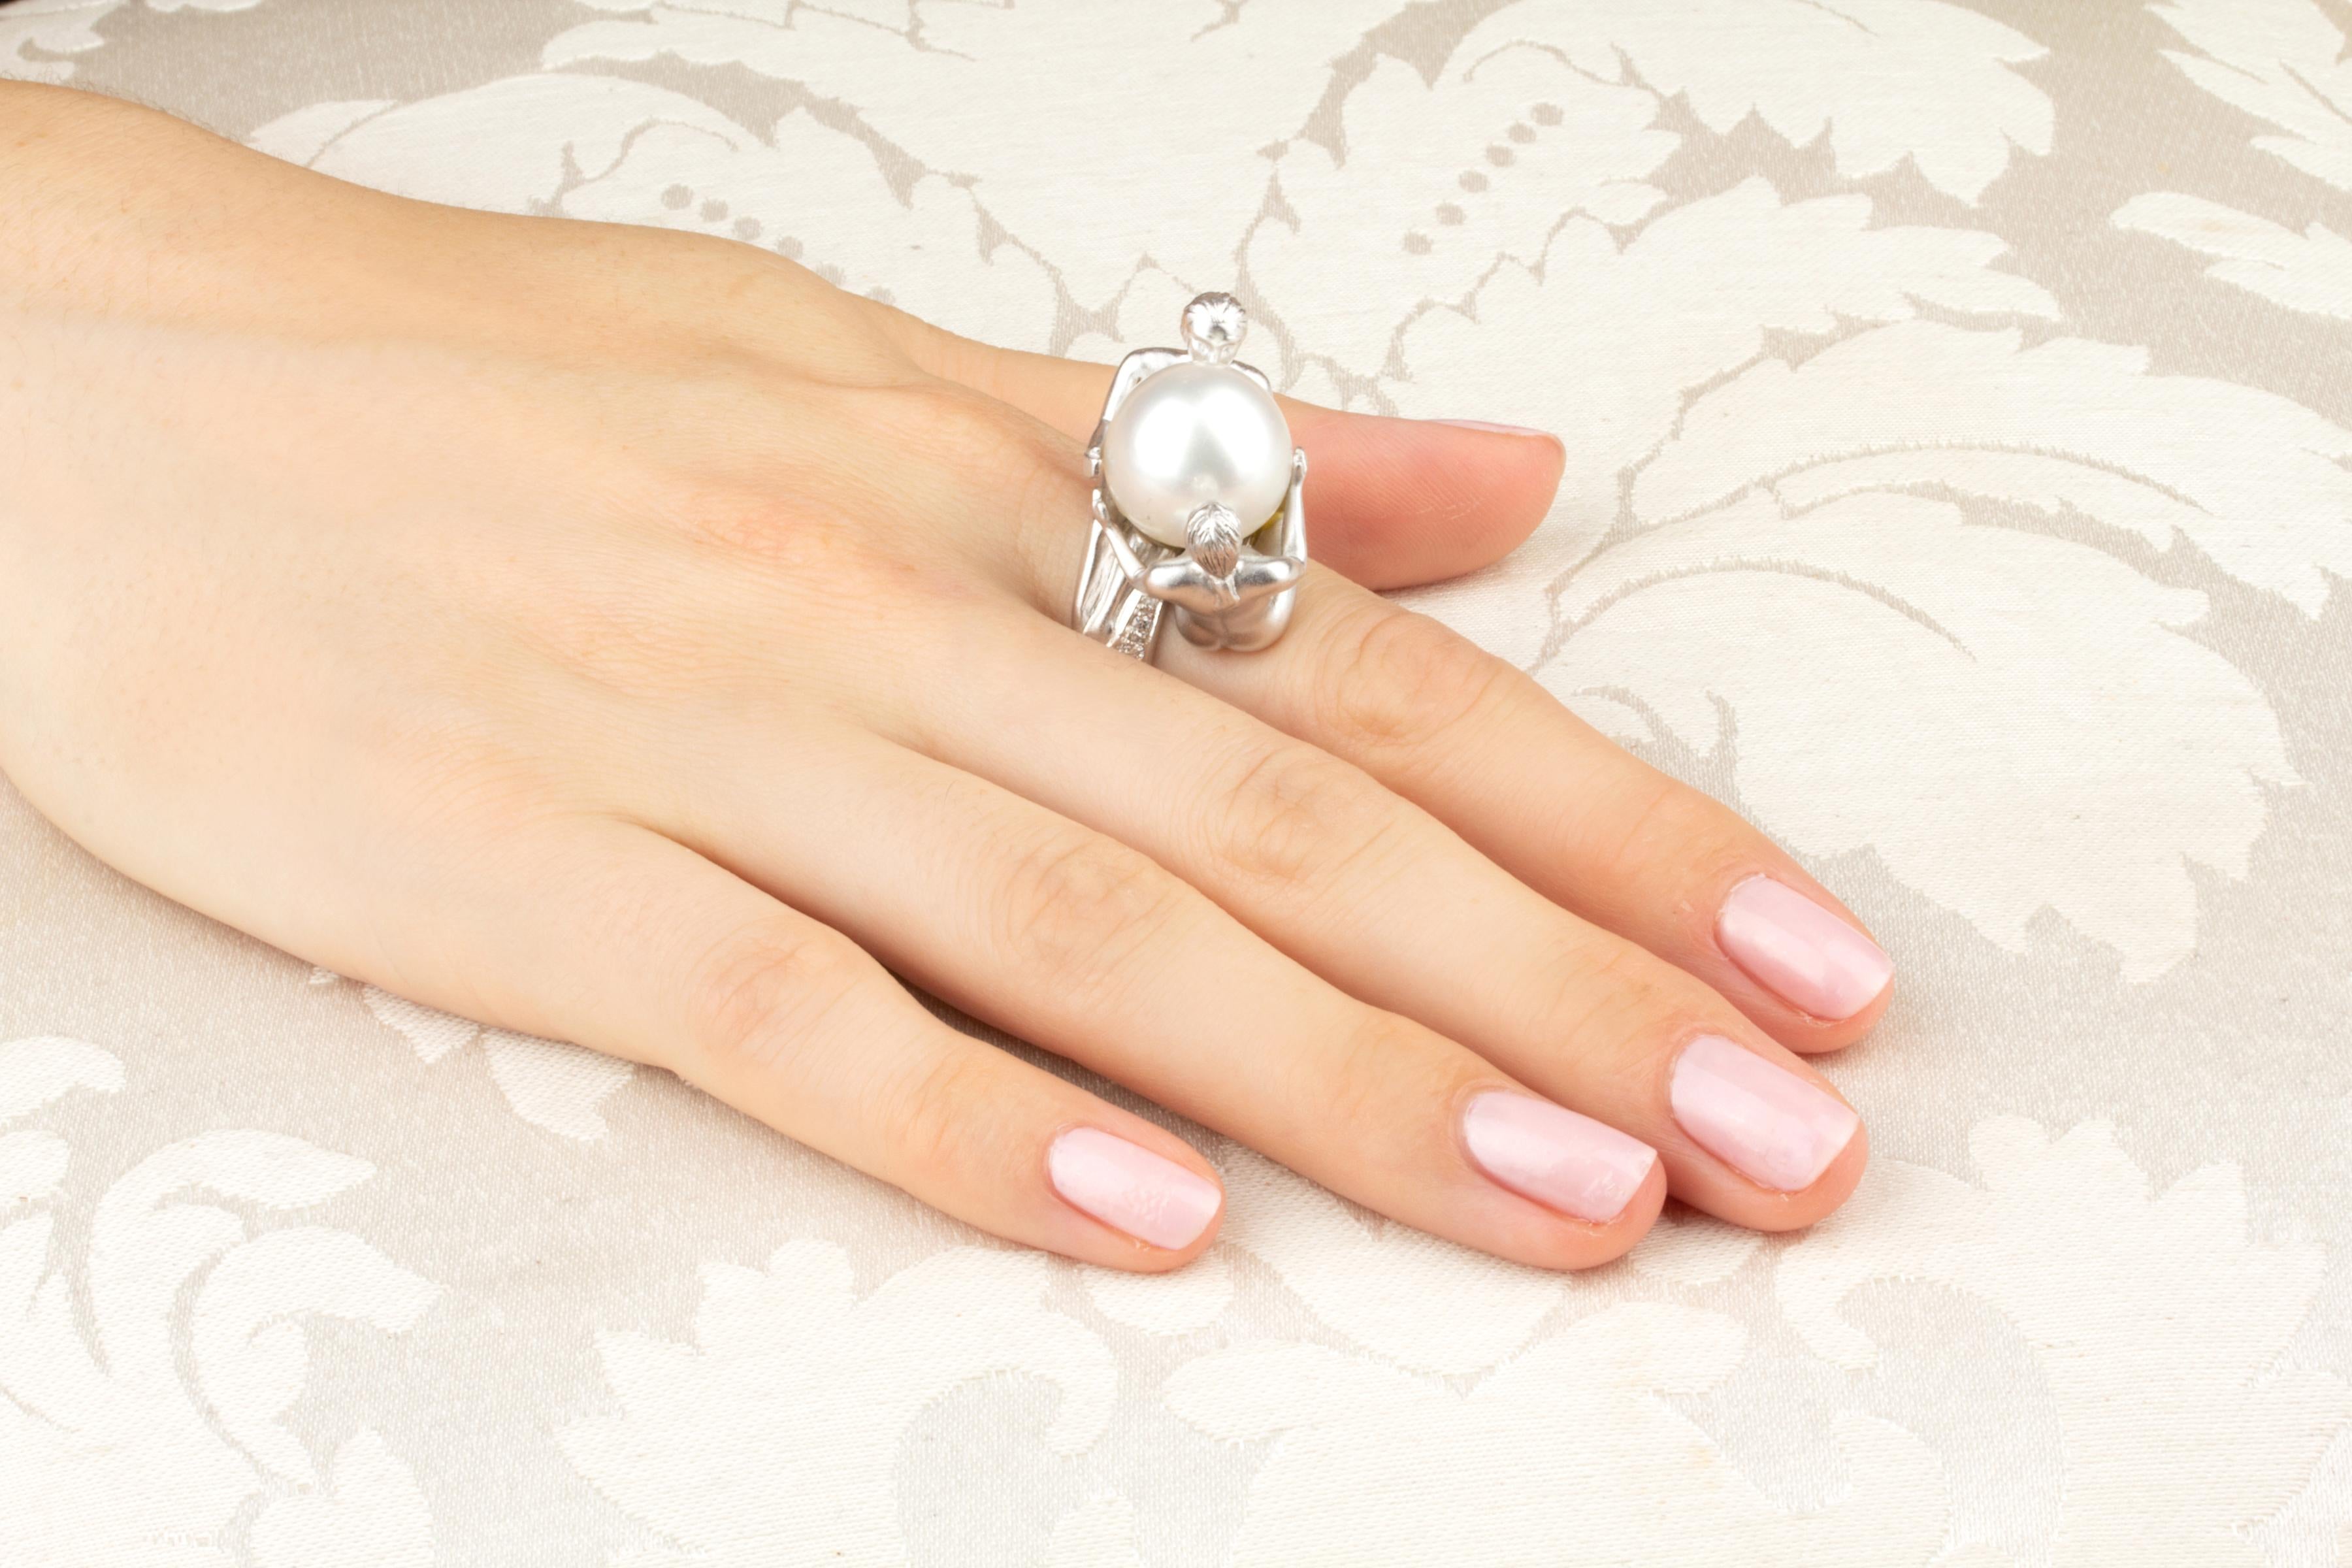 The zodiac Gemini ring features a South Sea pearl of 15mm diameter embraced by a male and a female figure, both sculpted in detail. The pearl is untreated. It displays fine nacre and its natural color and luster have not been enhanced in any way.